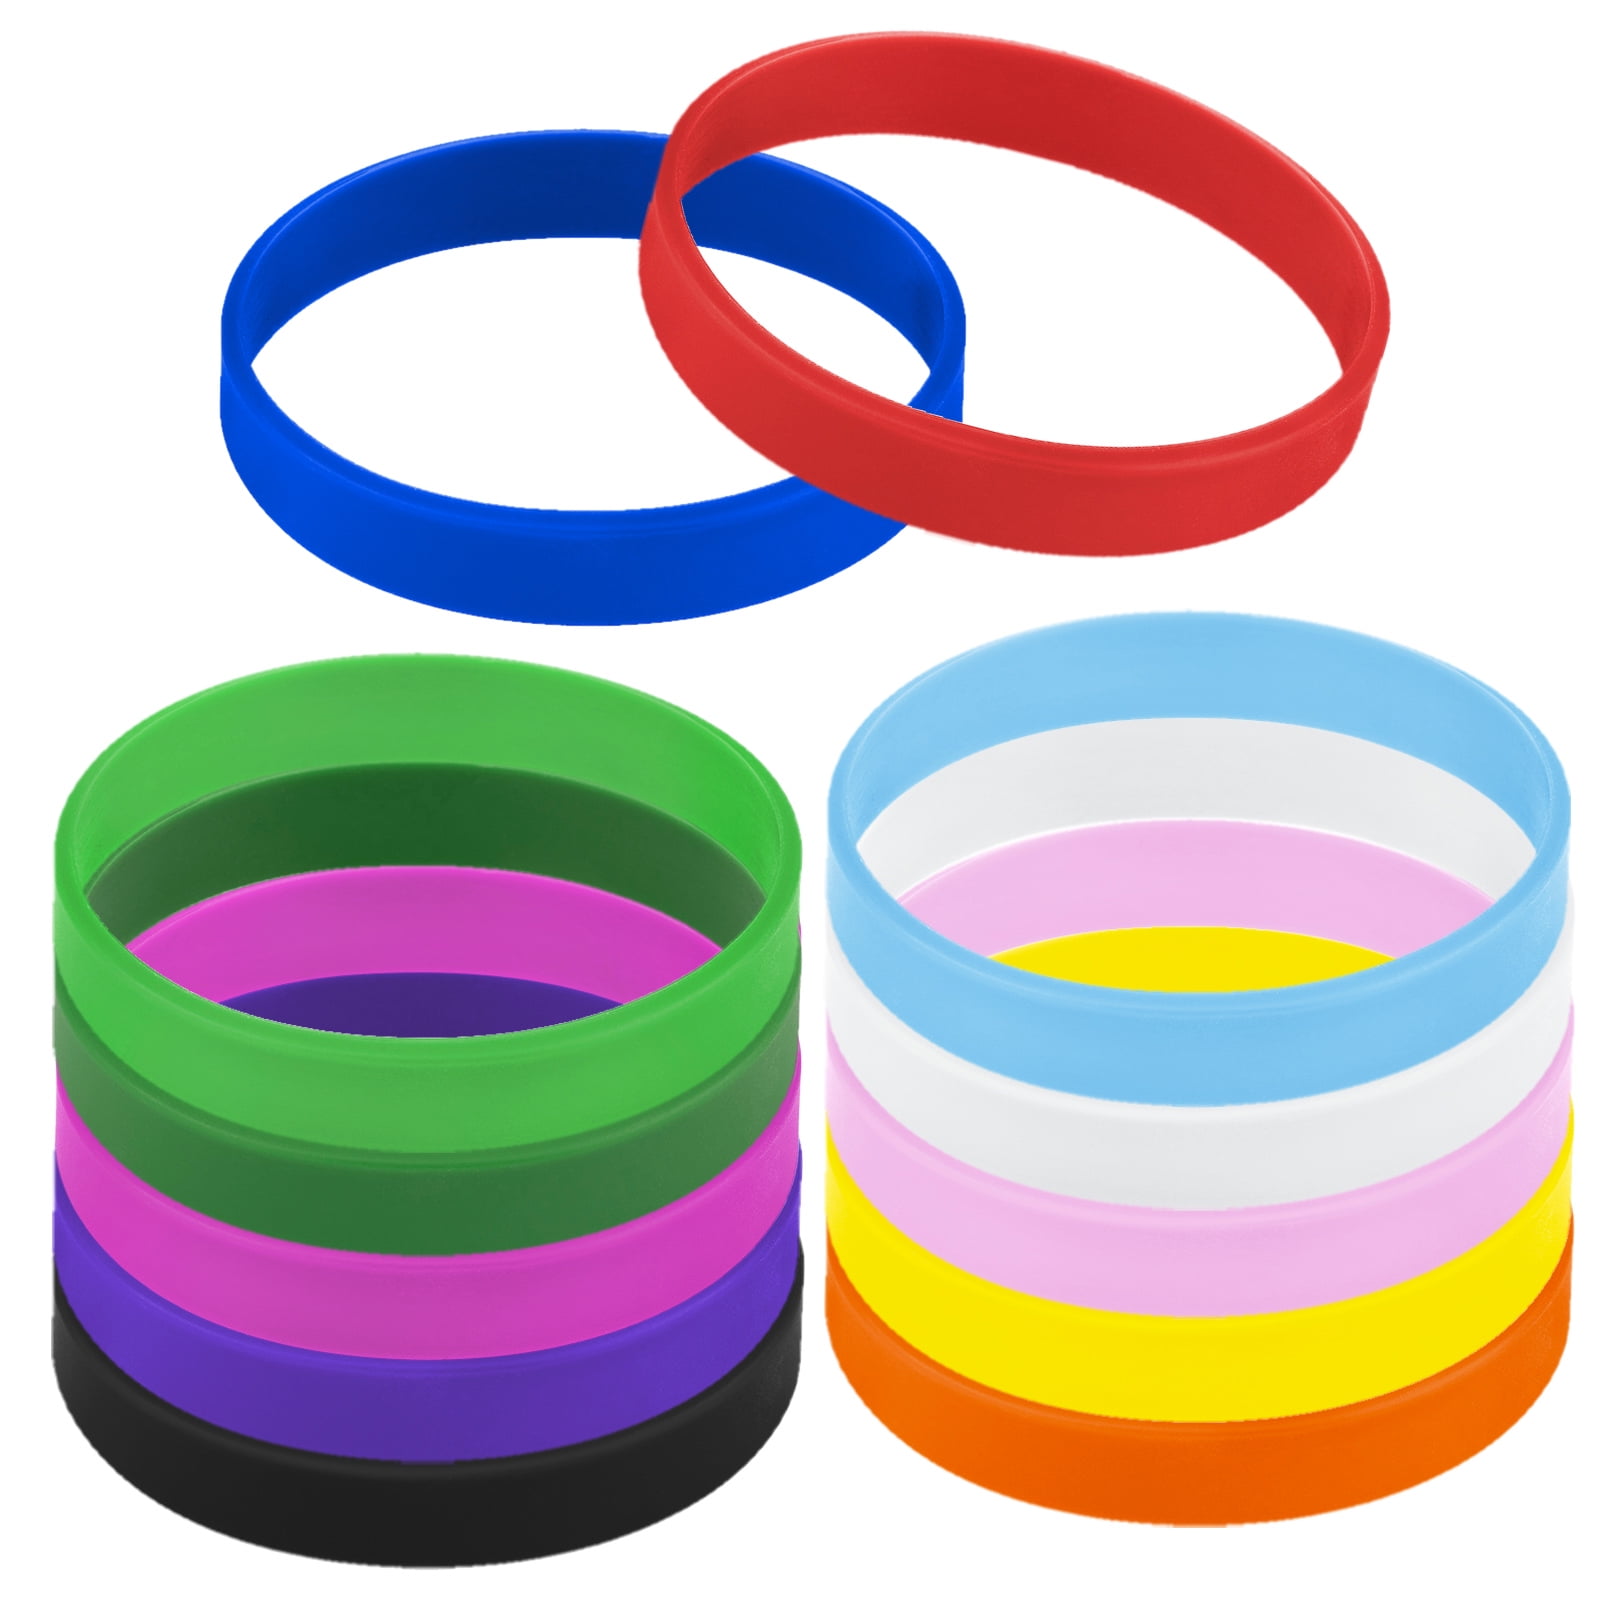 GOGO 12 Pcs Adult Rubber Bracelets, Silicone Wristbands, Party Accessories  - Mixed Colors